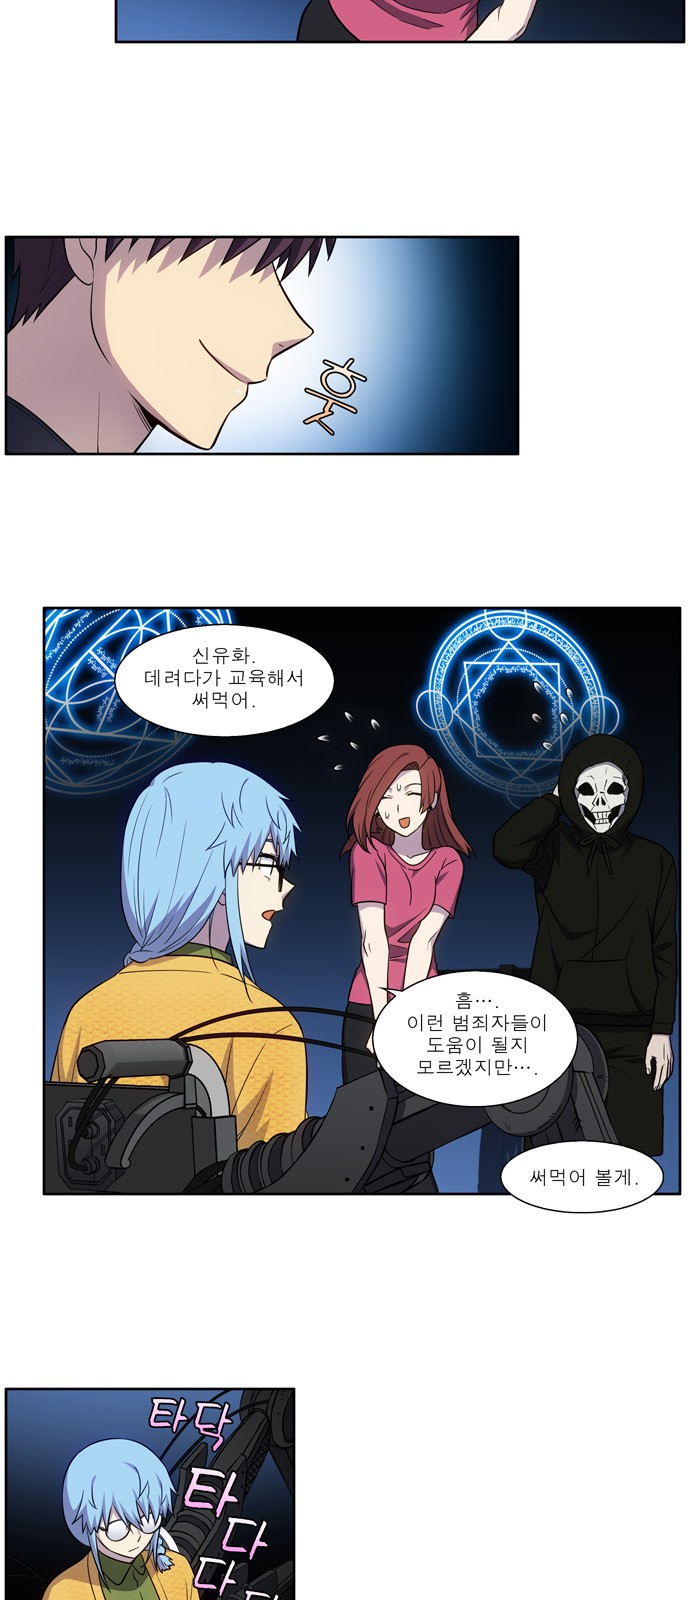 The Gamer - Chapter 434 - Page 3